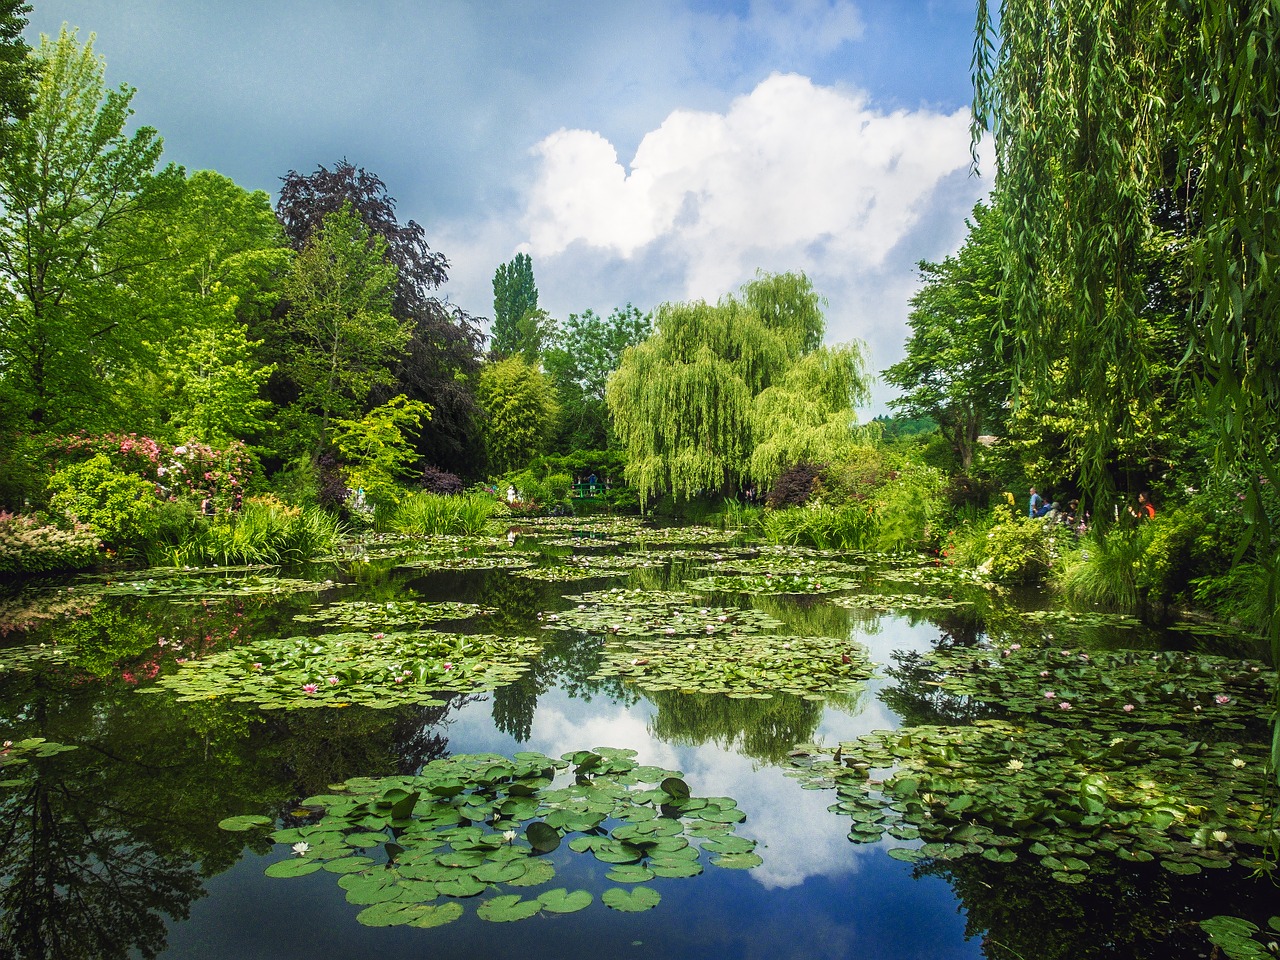 How To Get From Paris to Giverny